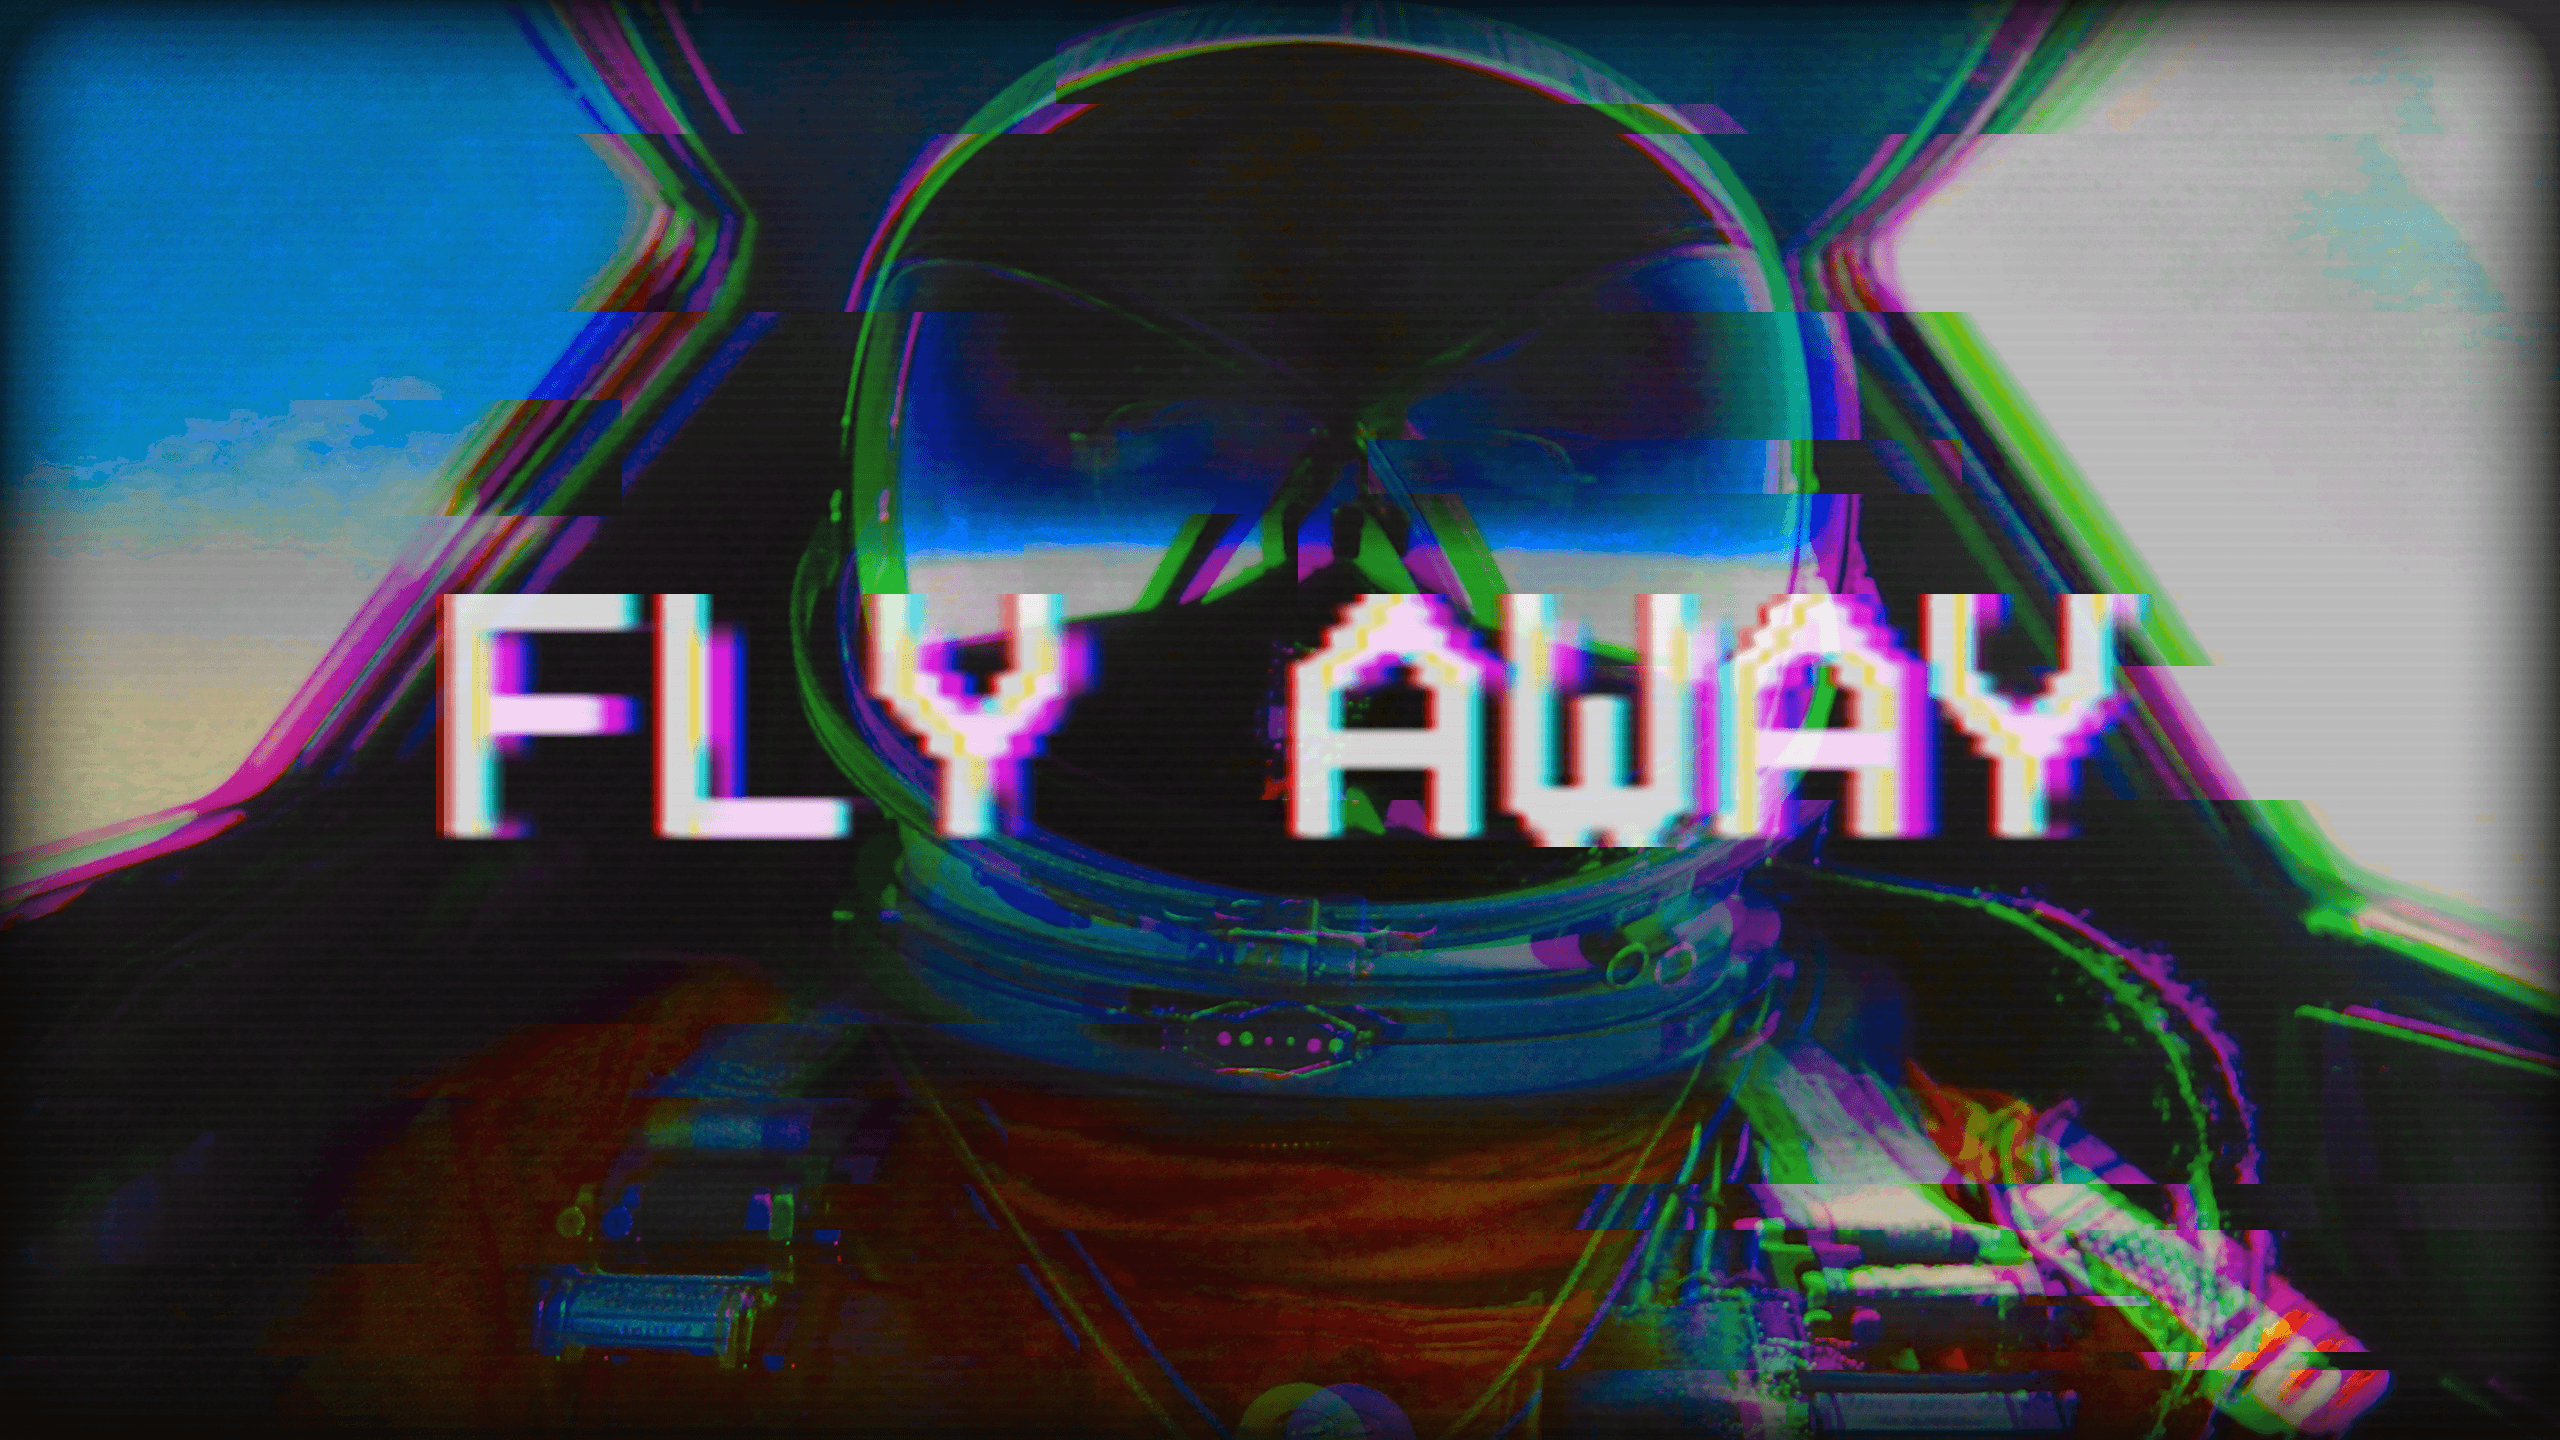 View, download, comment, and rate this 2560x1440 Vaporwave